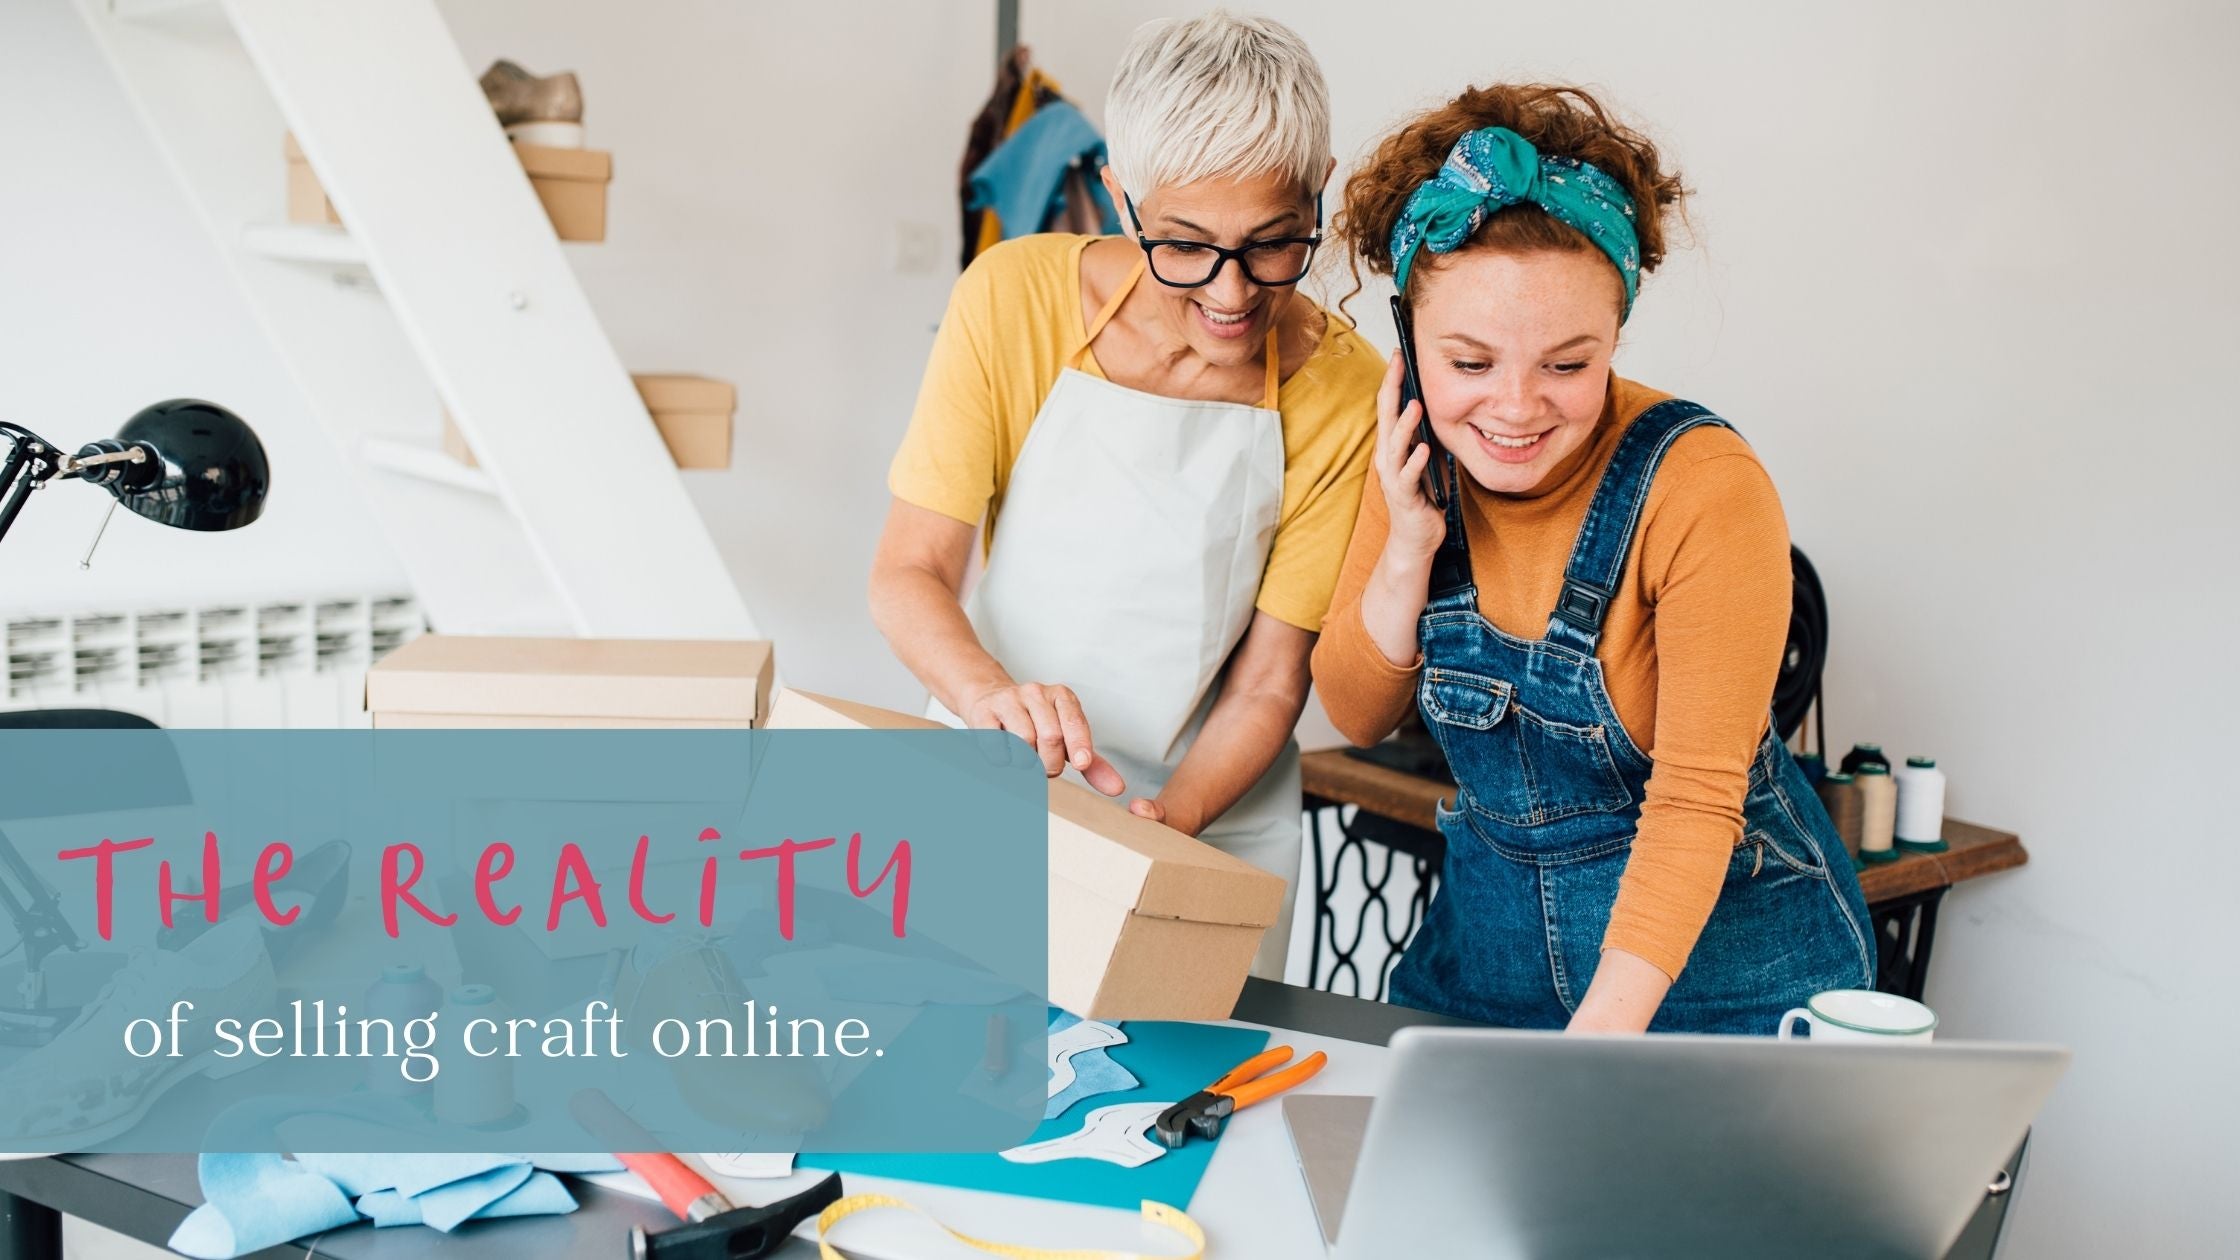 The Reality of Selling Craft Online